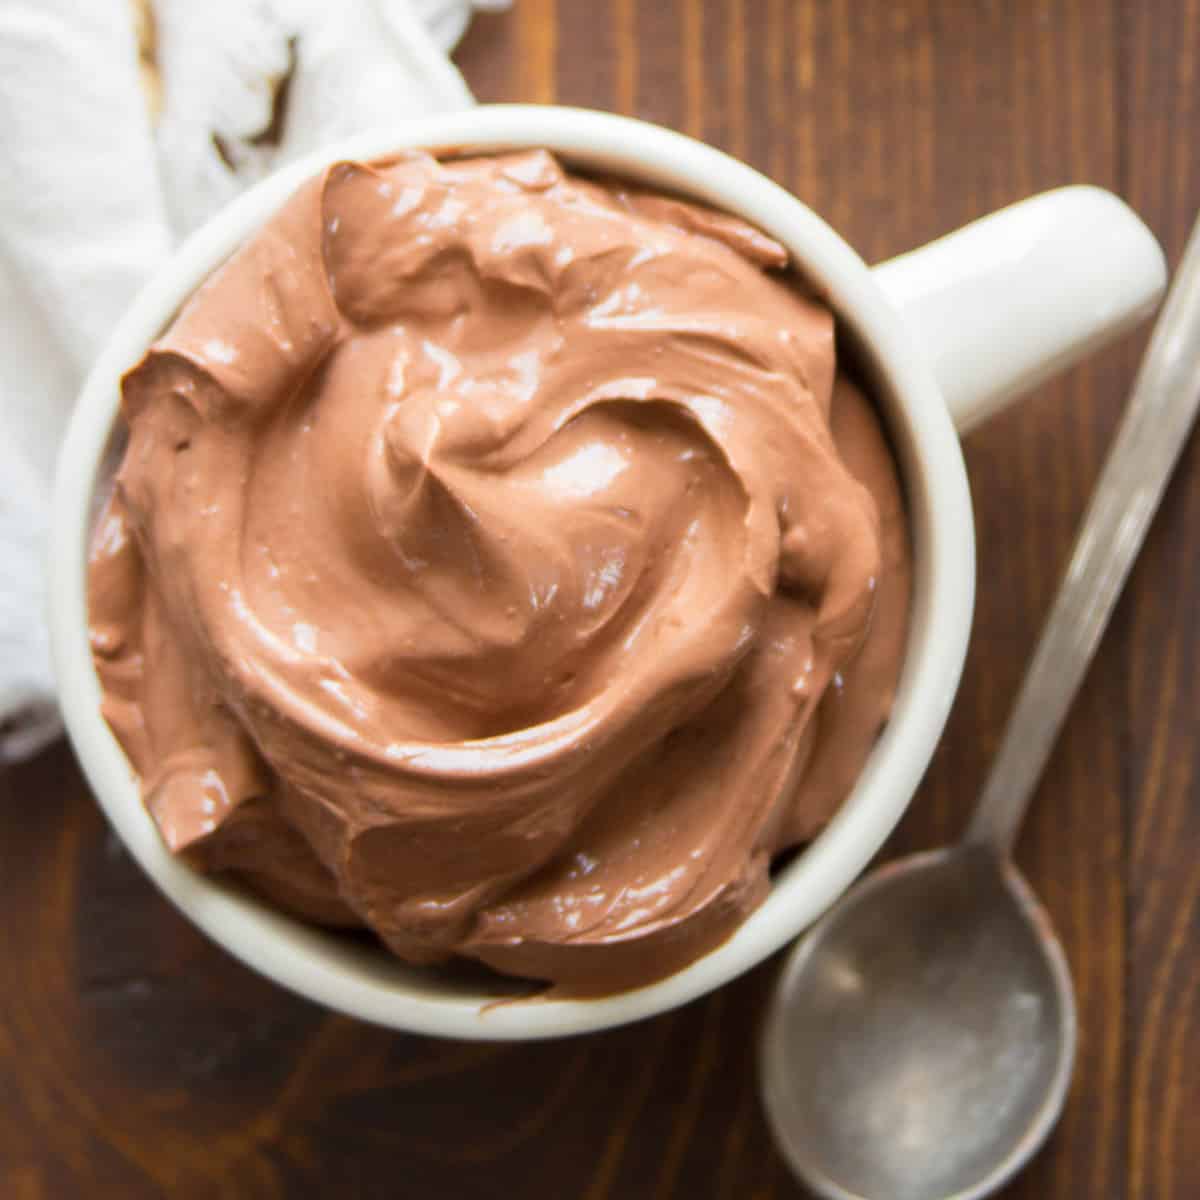 Cup of Vegan Chocolate Pudding with spoon on the side.